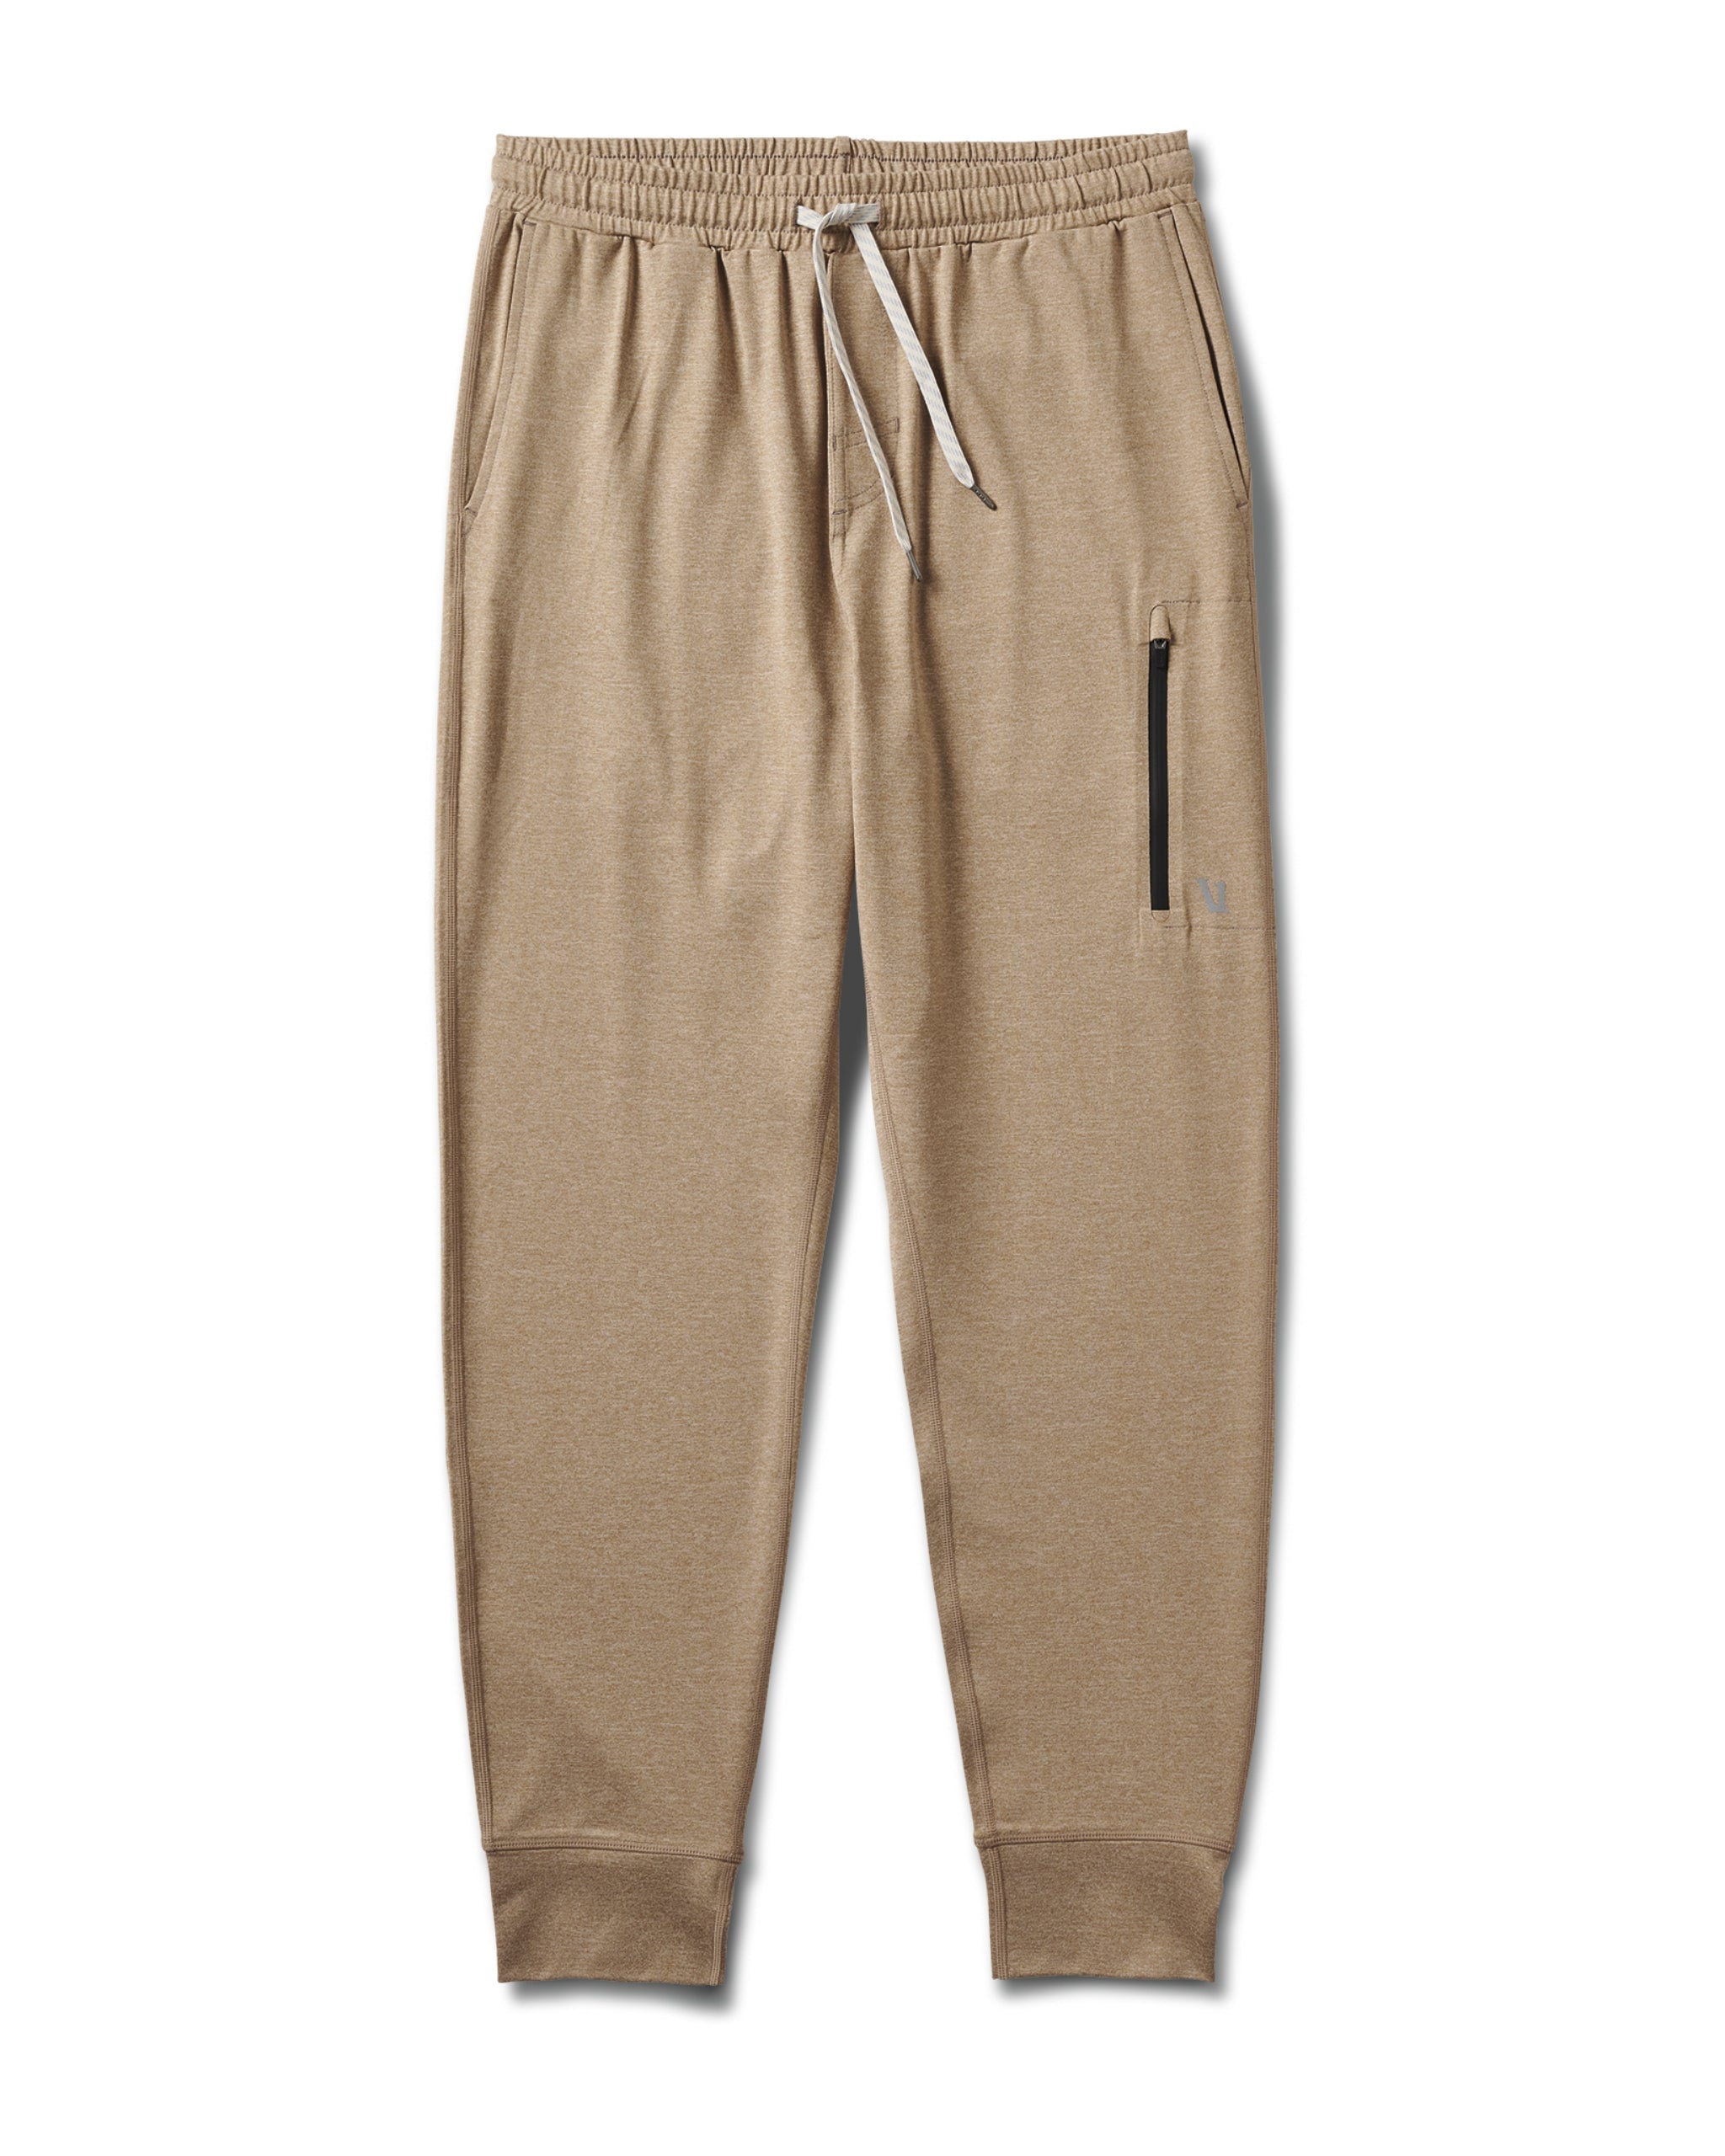  Idtswch 40 Inseam Mens Tall Sweatpants Extra Long